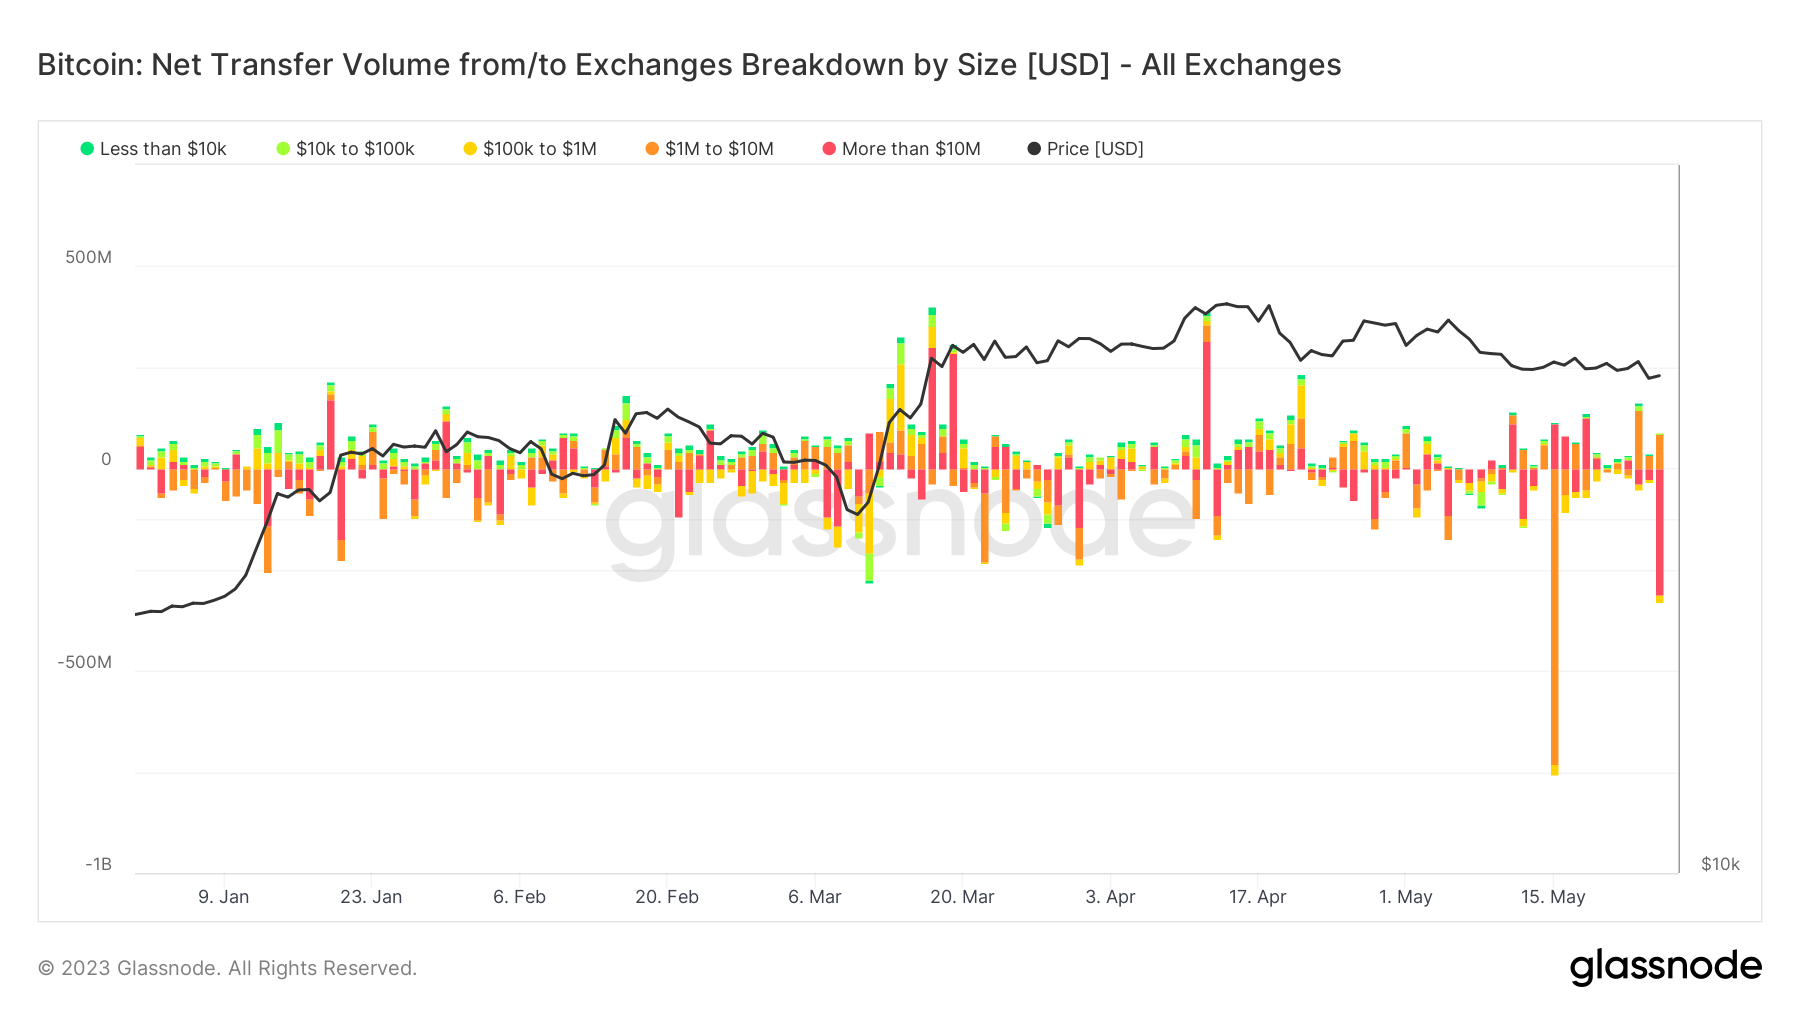 Second largest Bitcoin withdraw from exchanges this year